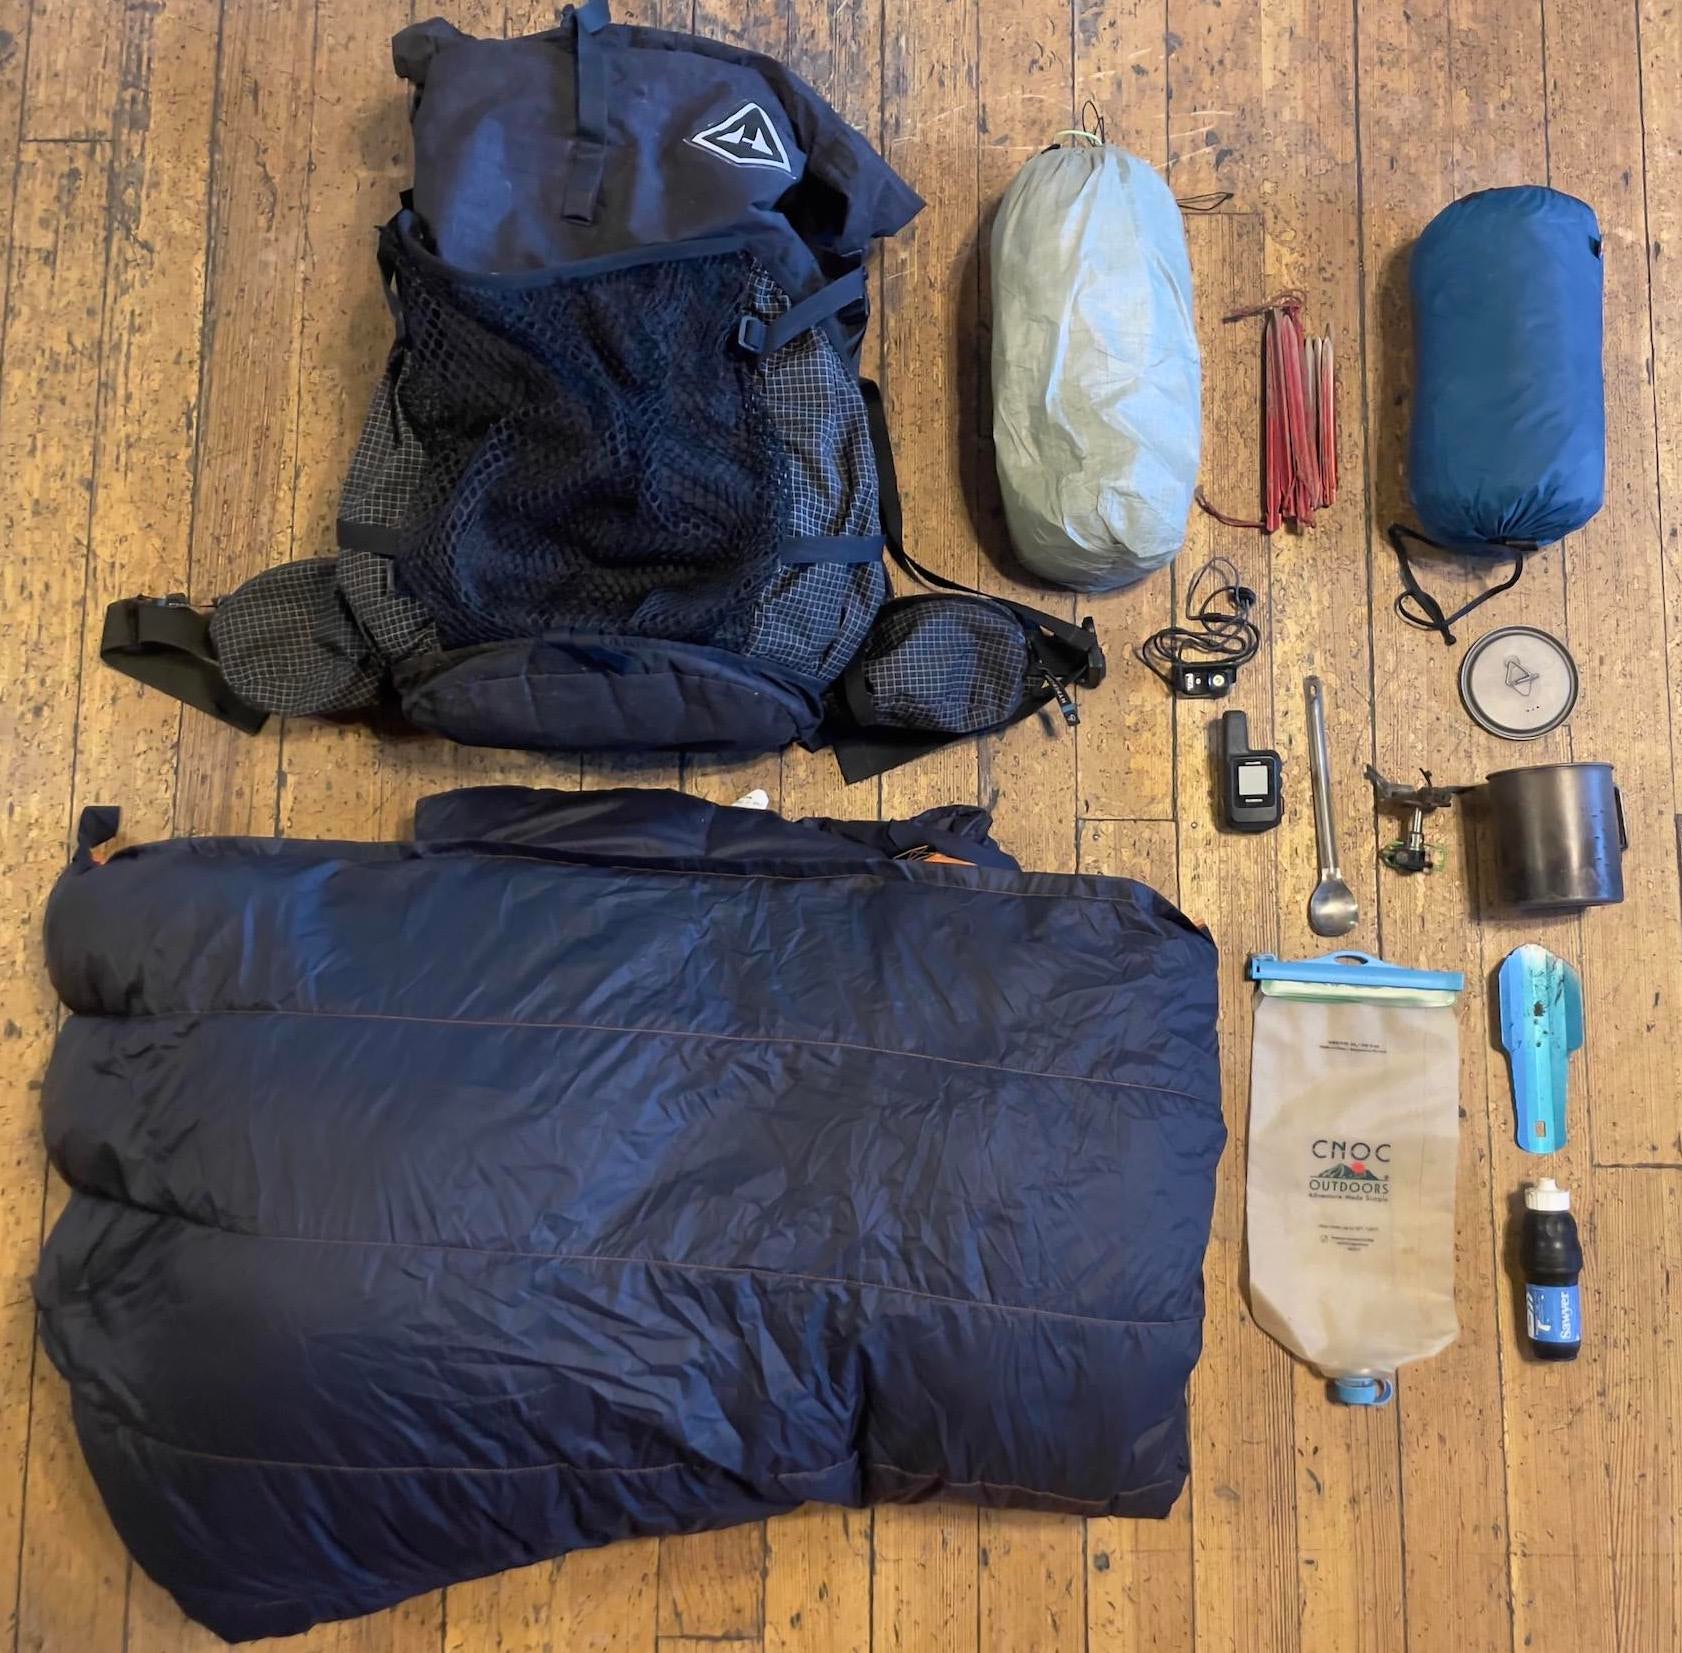 Jeff Oliver's Hiking Gear